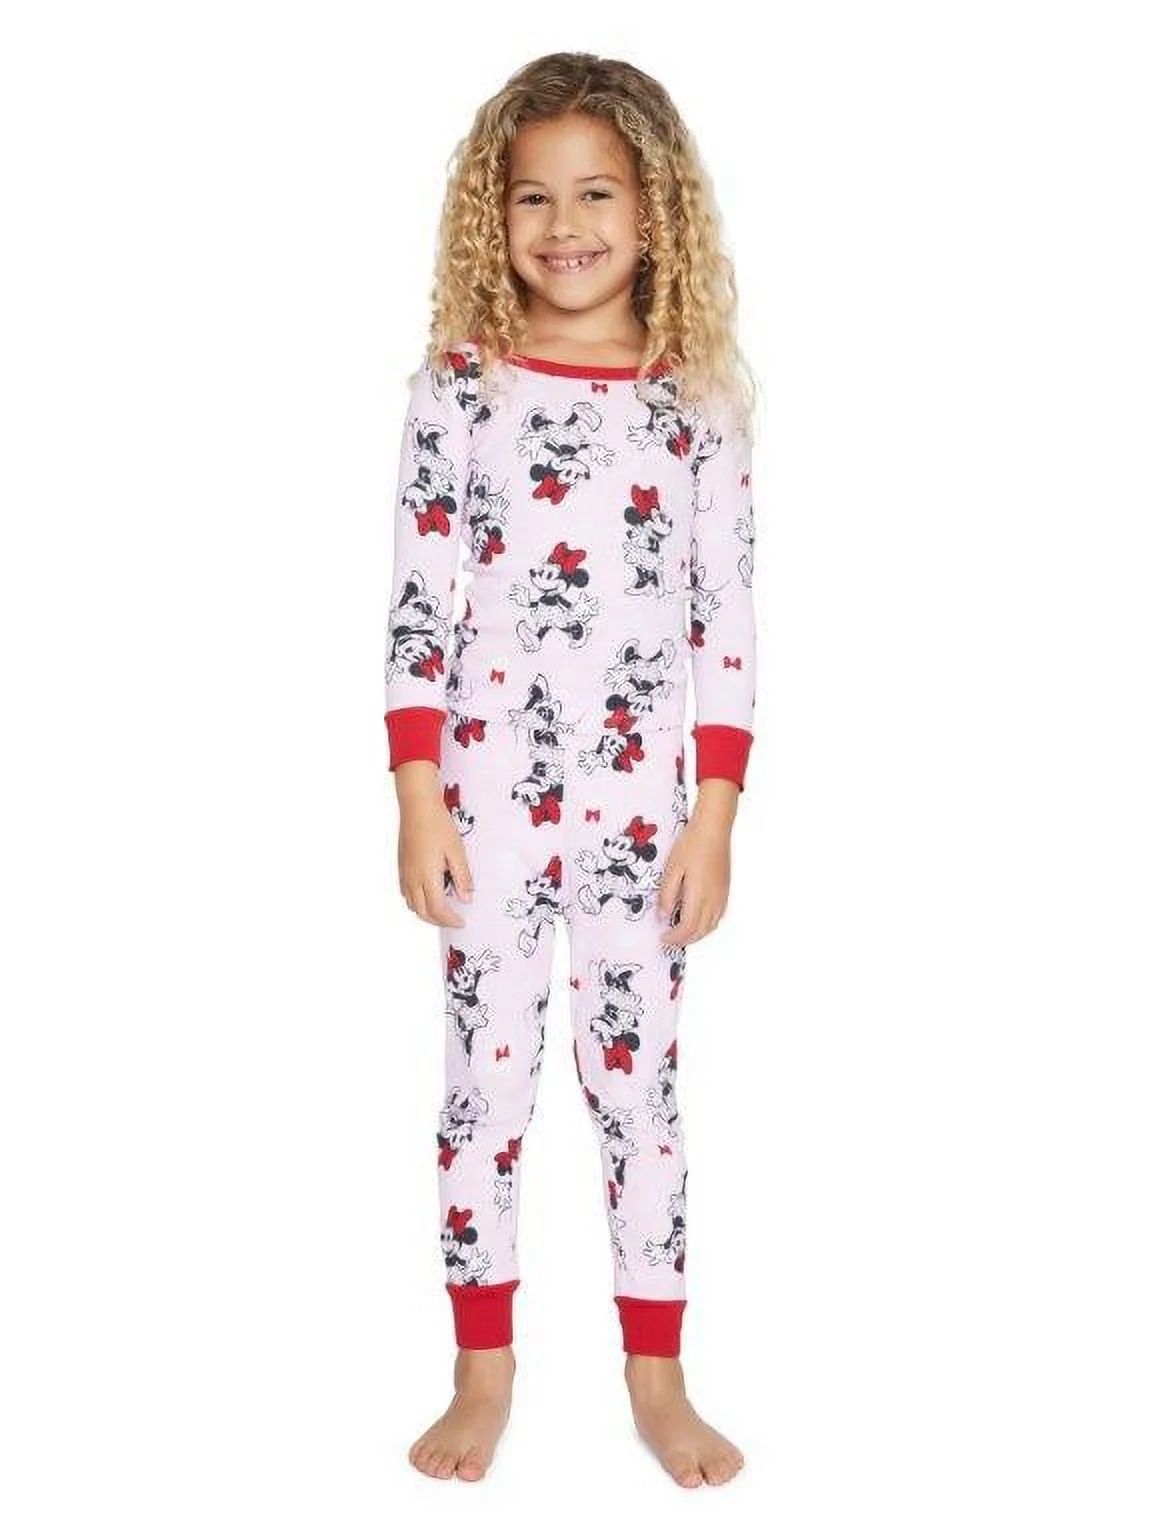 Disney Minnie Mouse Toddler Girls Long Sleeve Top and Pants, 2-Piece Pajama Set, Sizes 12M-5T | Walmart (US)